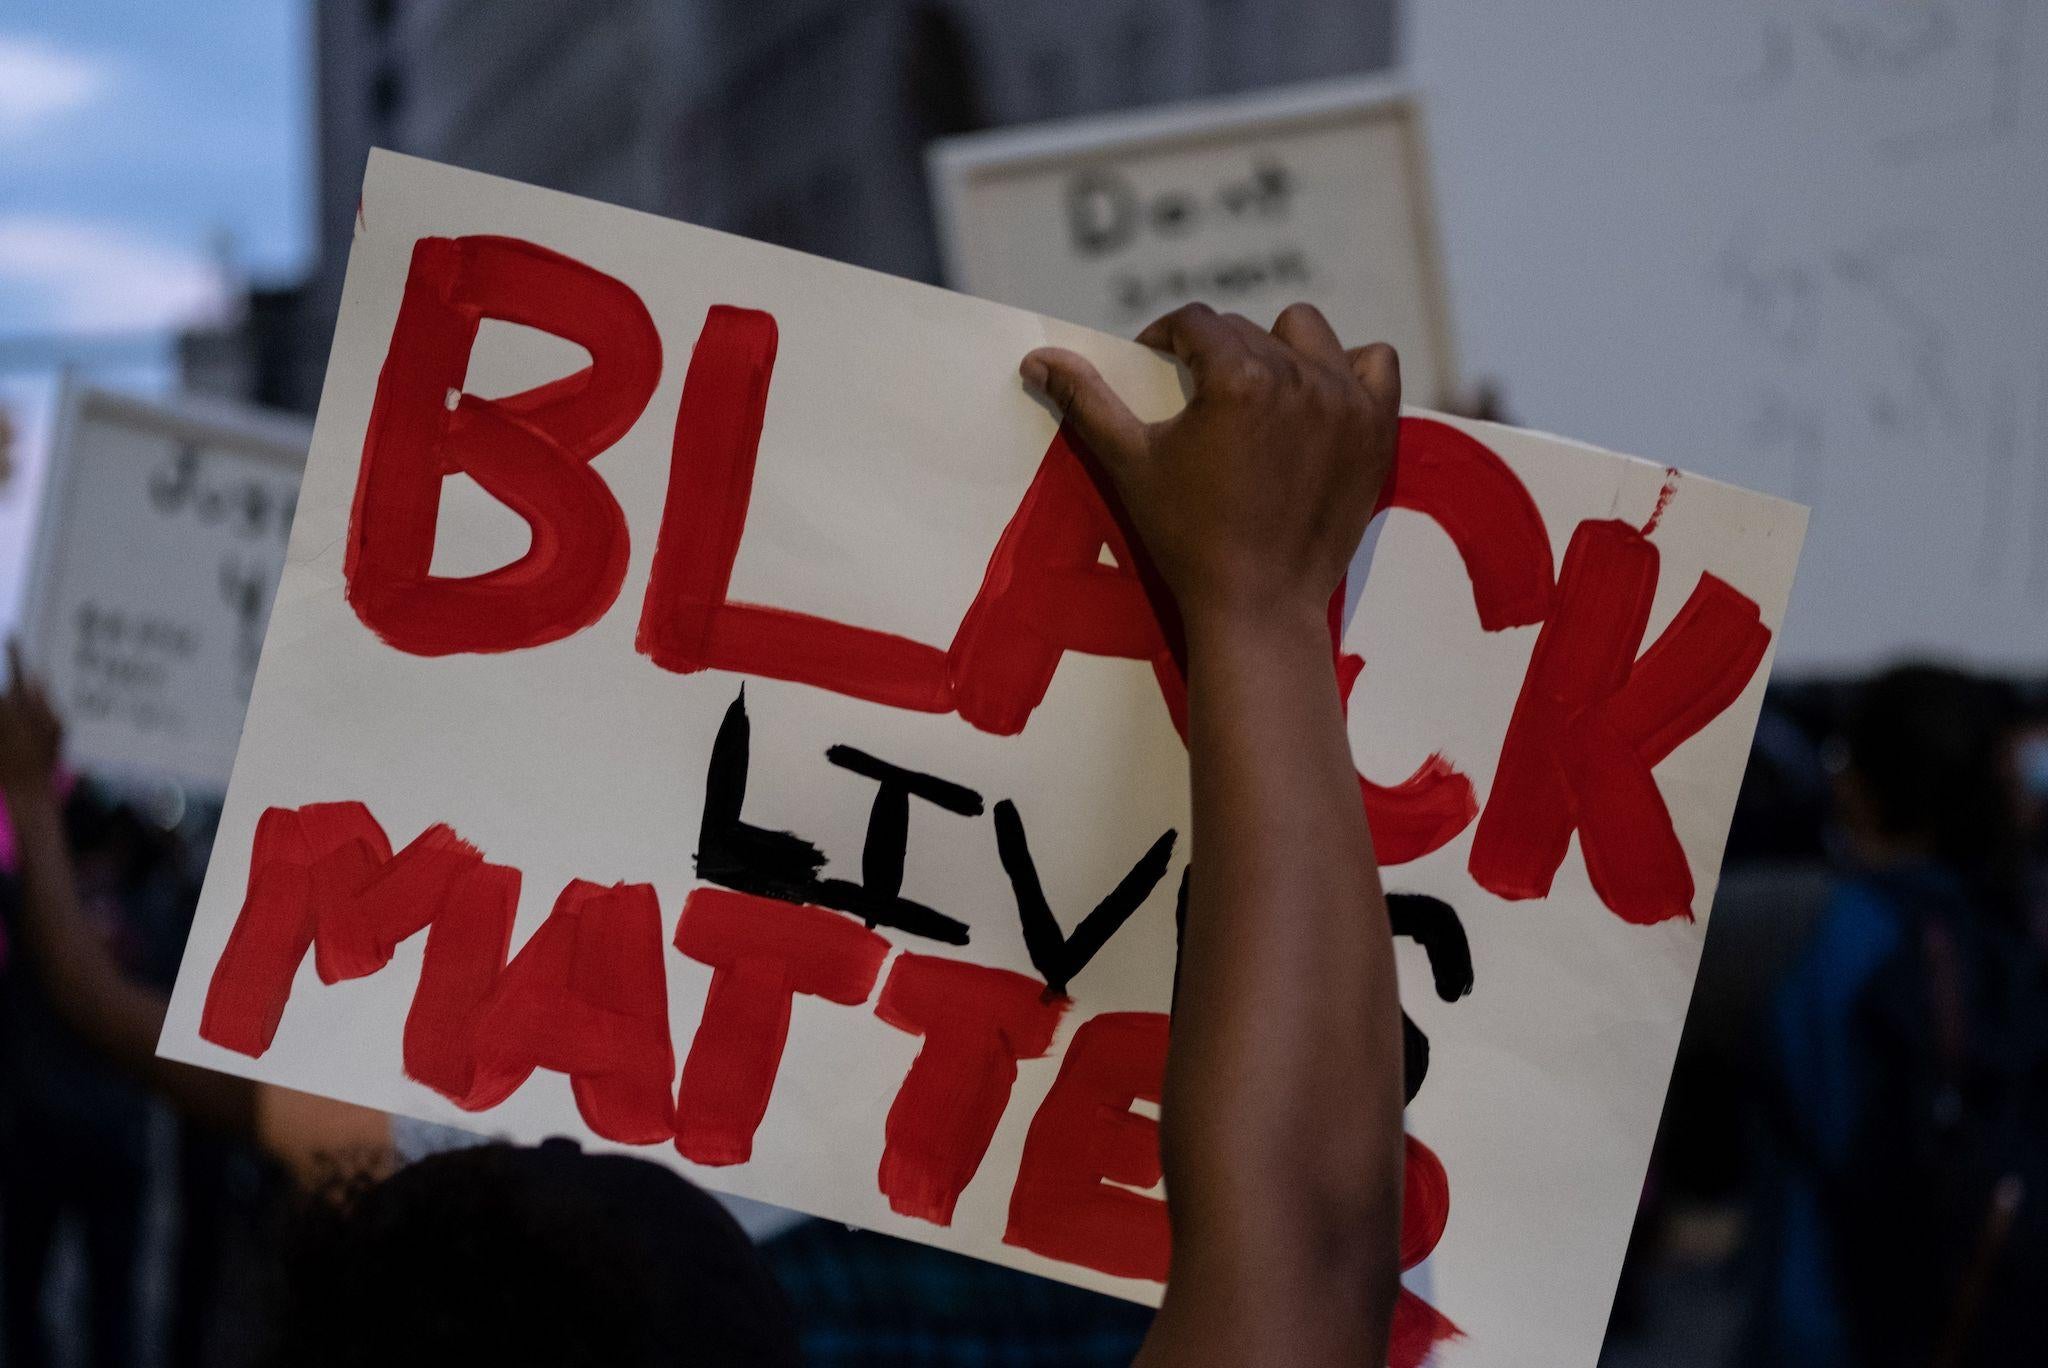 A person holds up a placard that reads, 'Black lives matter' during a protest in the city of Detroit, Michigan, on May 29, 2020